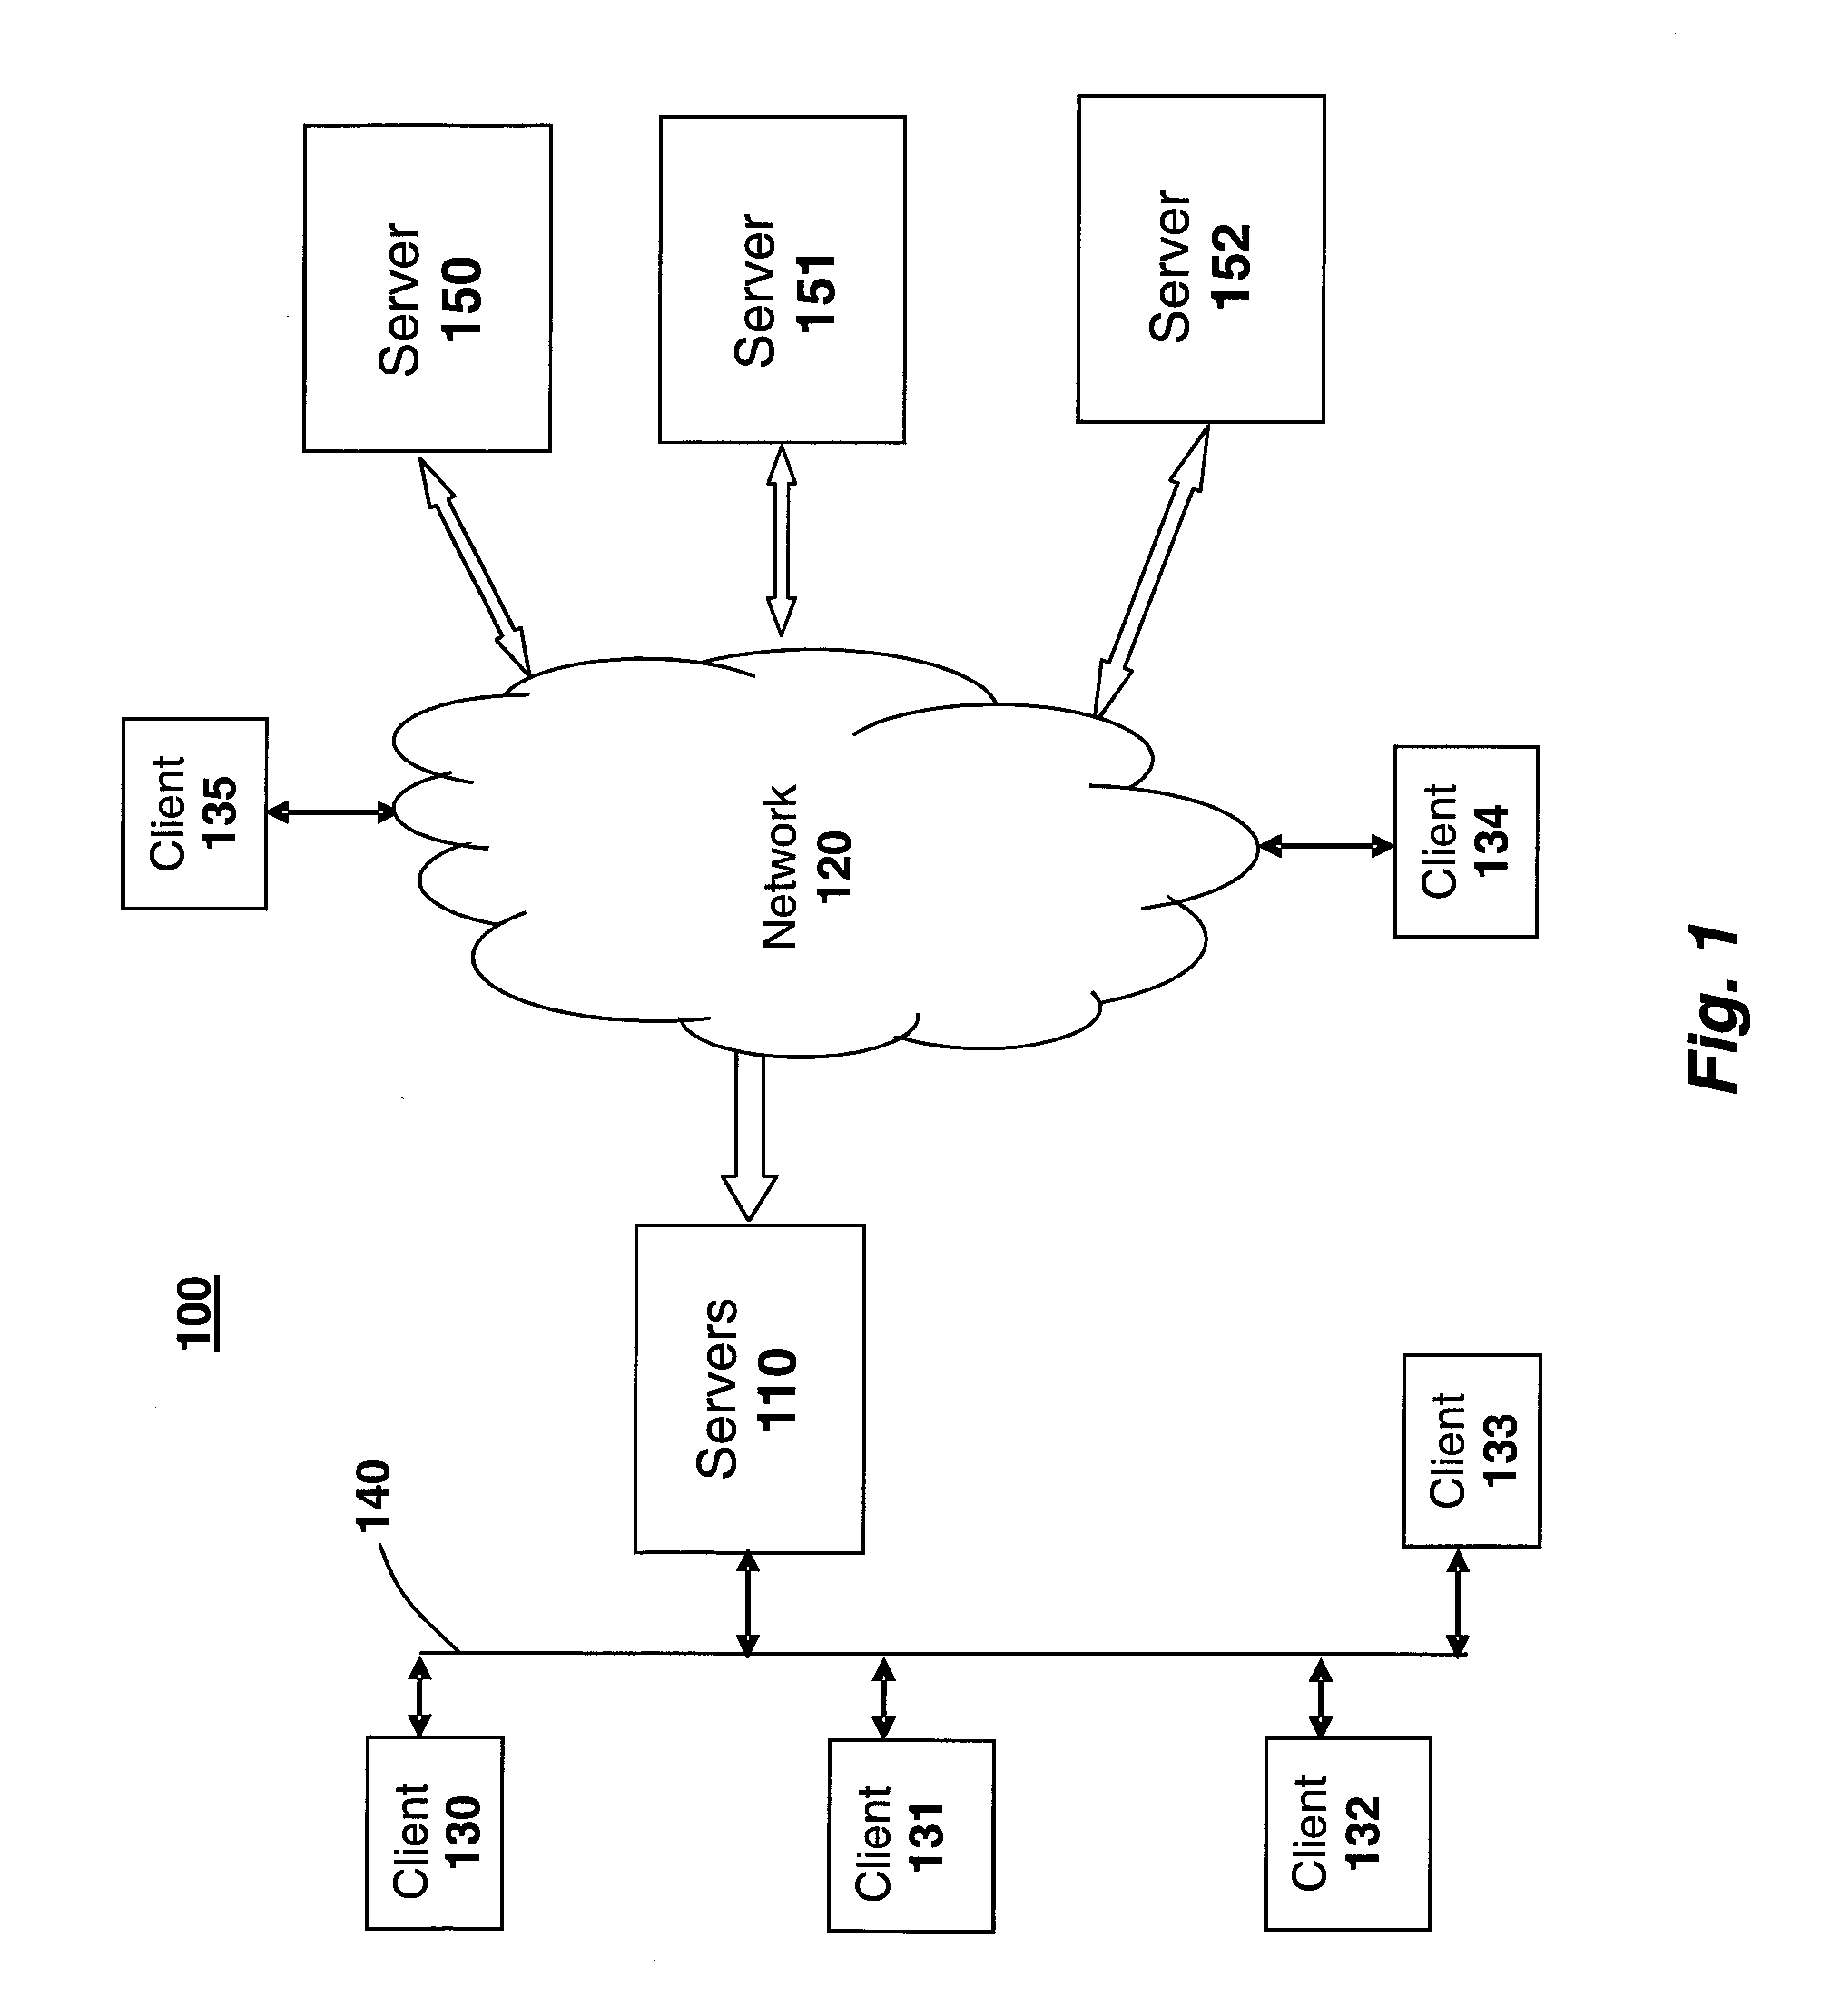 System and method for reducing the cost of efficient vehicles